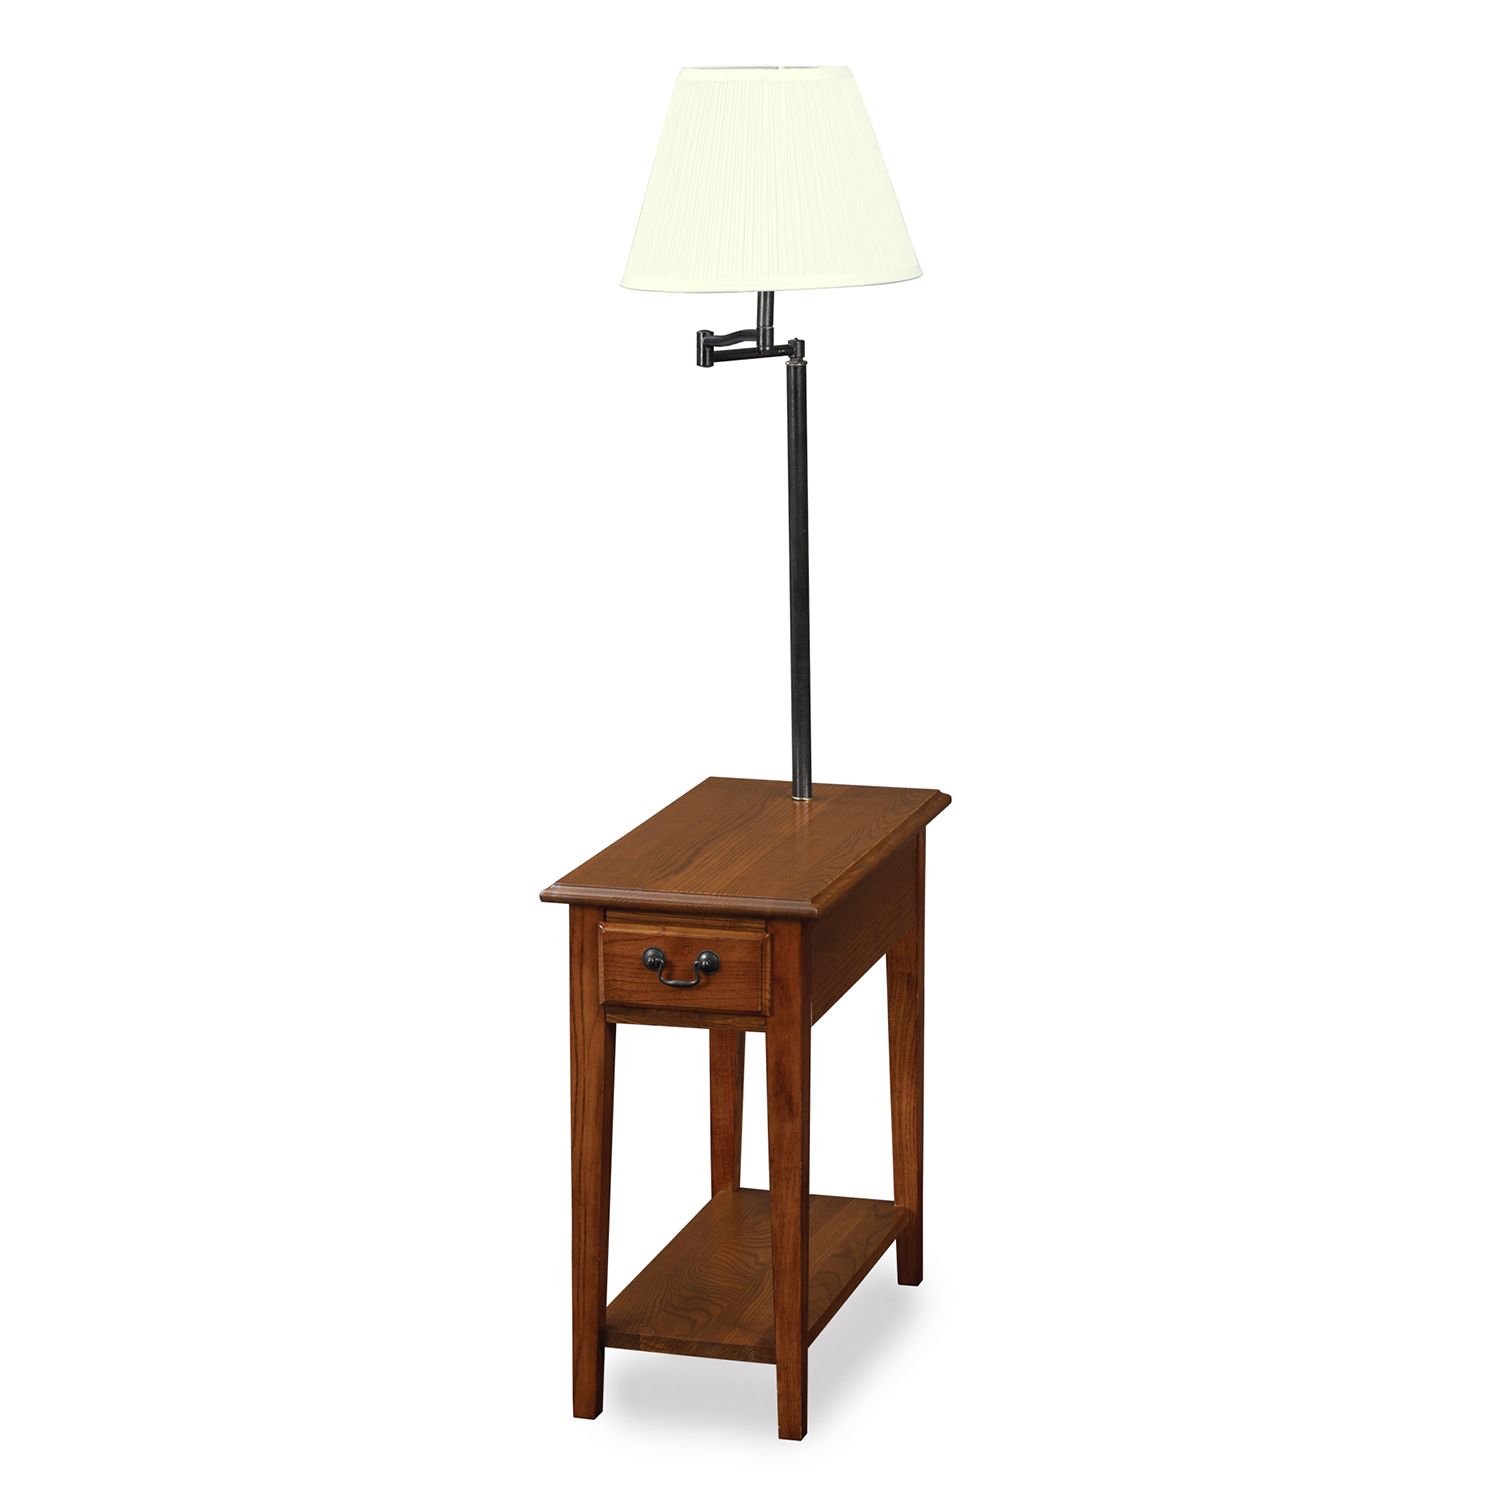 Image for Leick Furniture Chairside Lamp End Table at Kohl's.